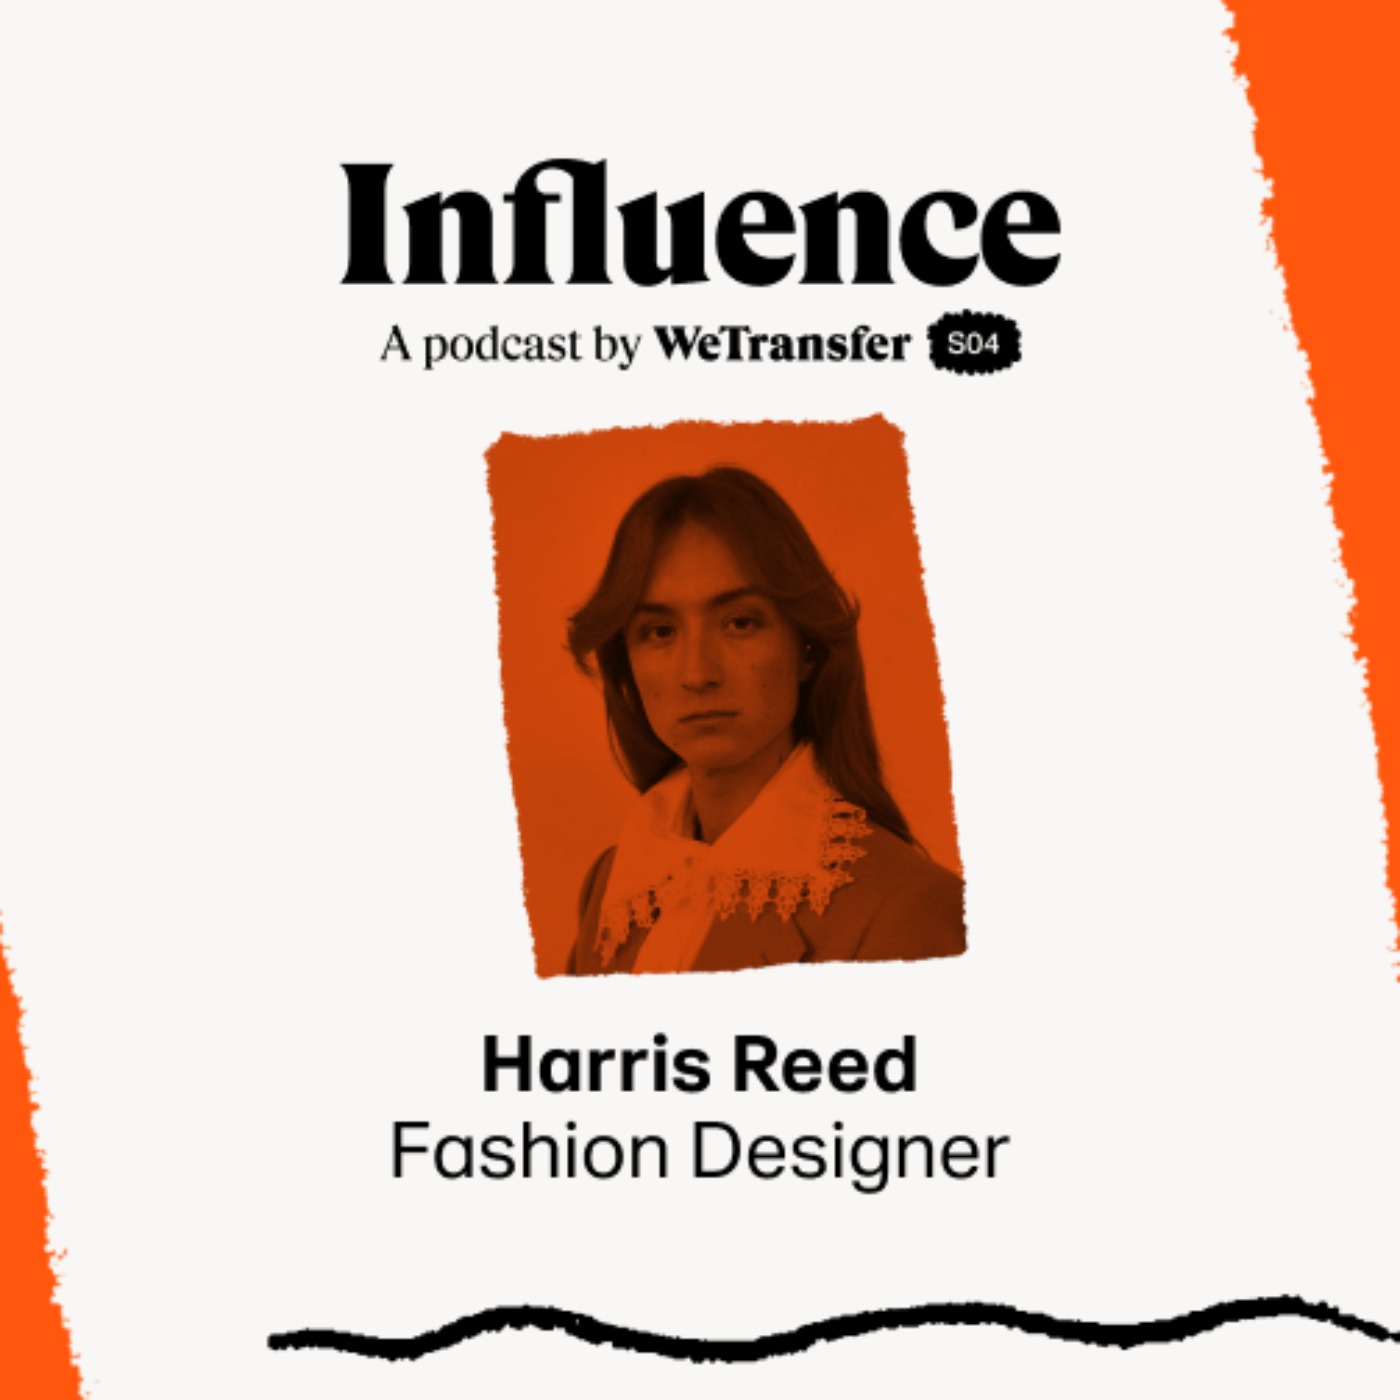 Harris Reed on The Business of Fluid Fashion